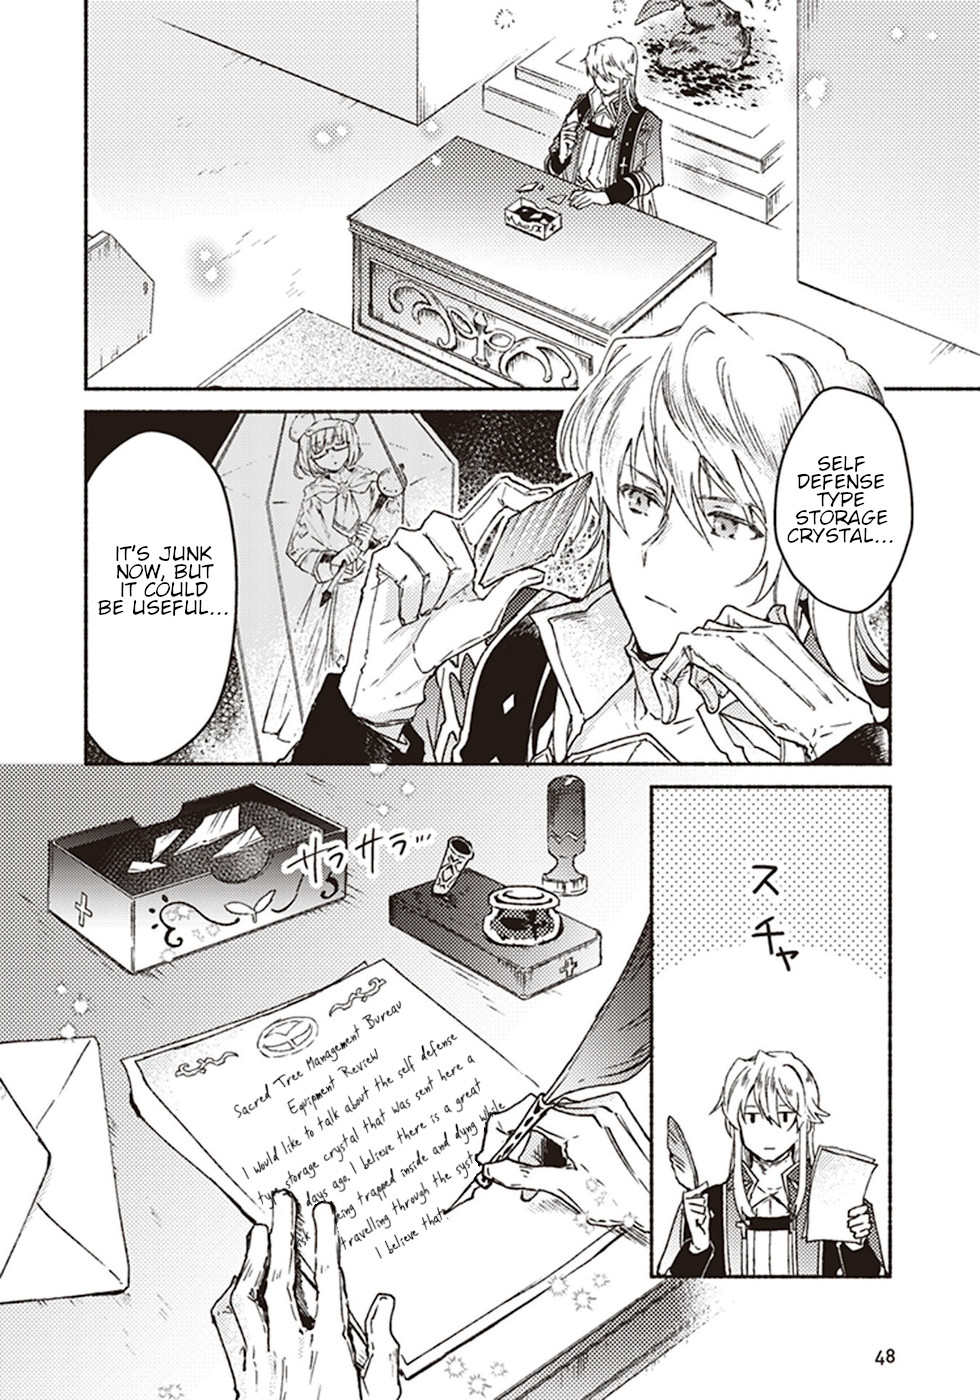 The Church in Front of the Devil’s Castle Vol. 2 Ch. 7 The Contents Of The Box Are Not Elegant